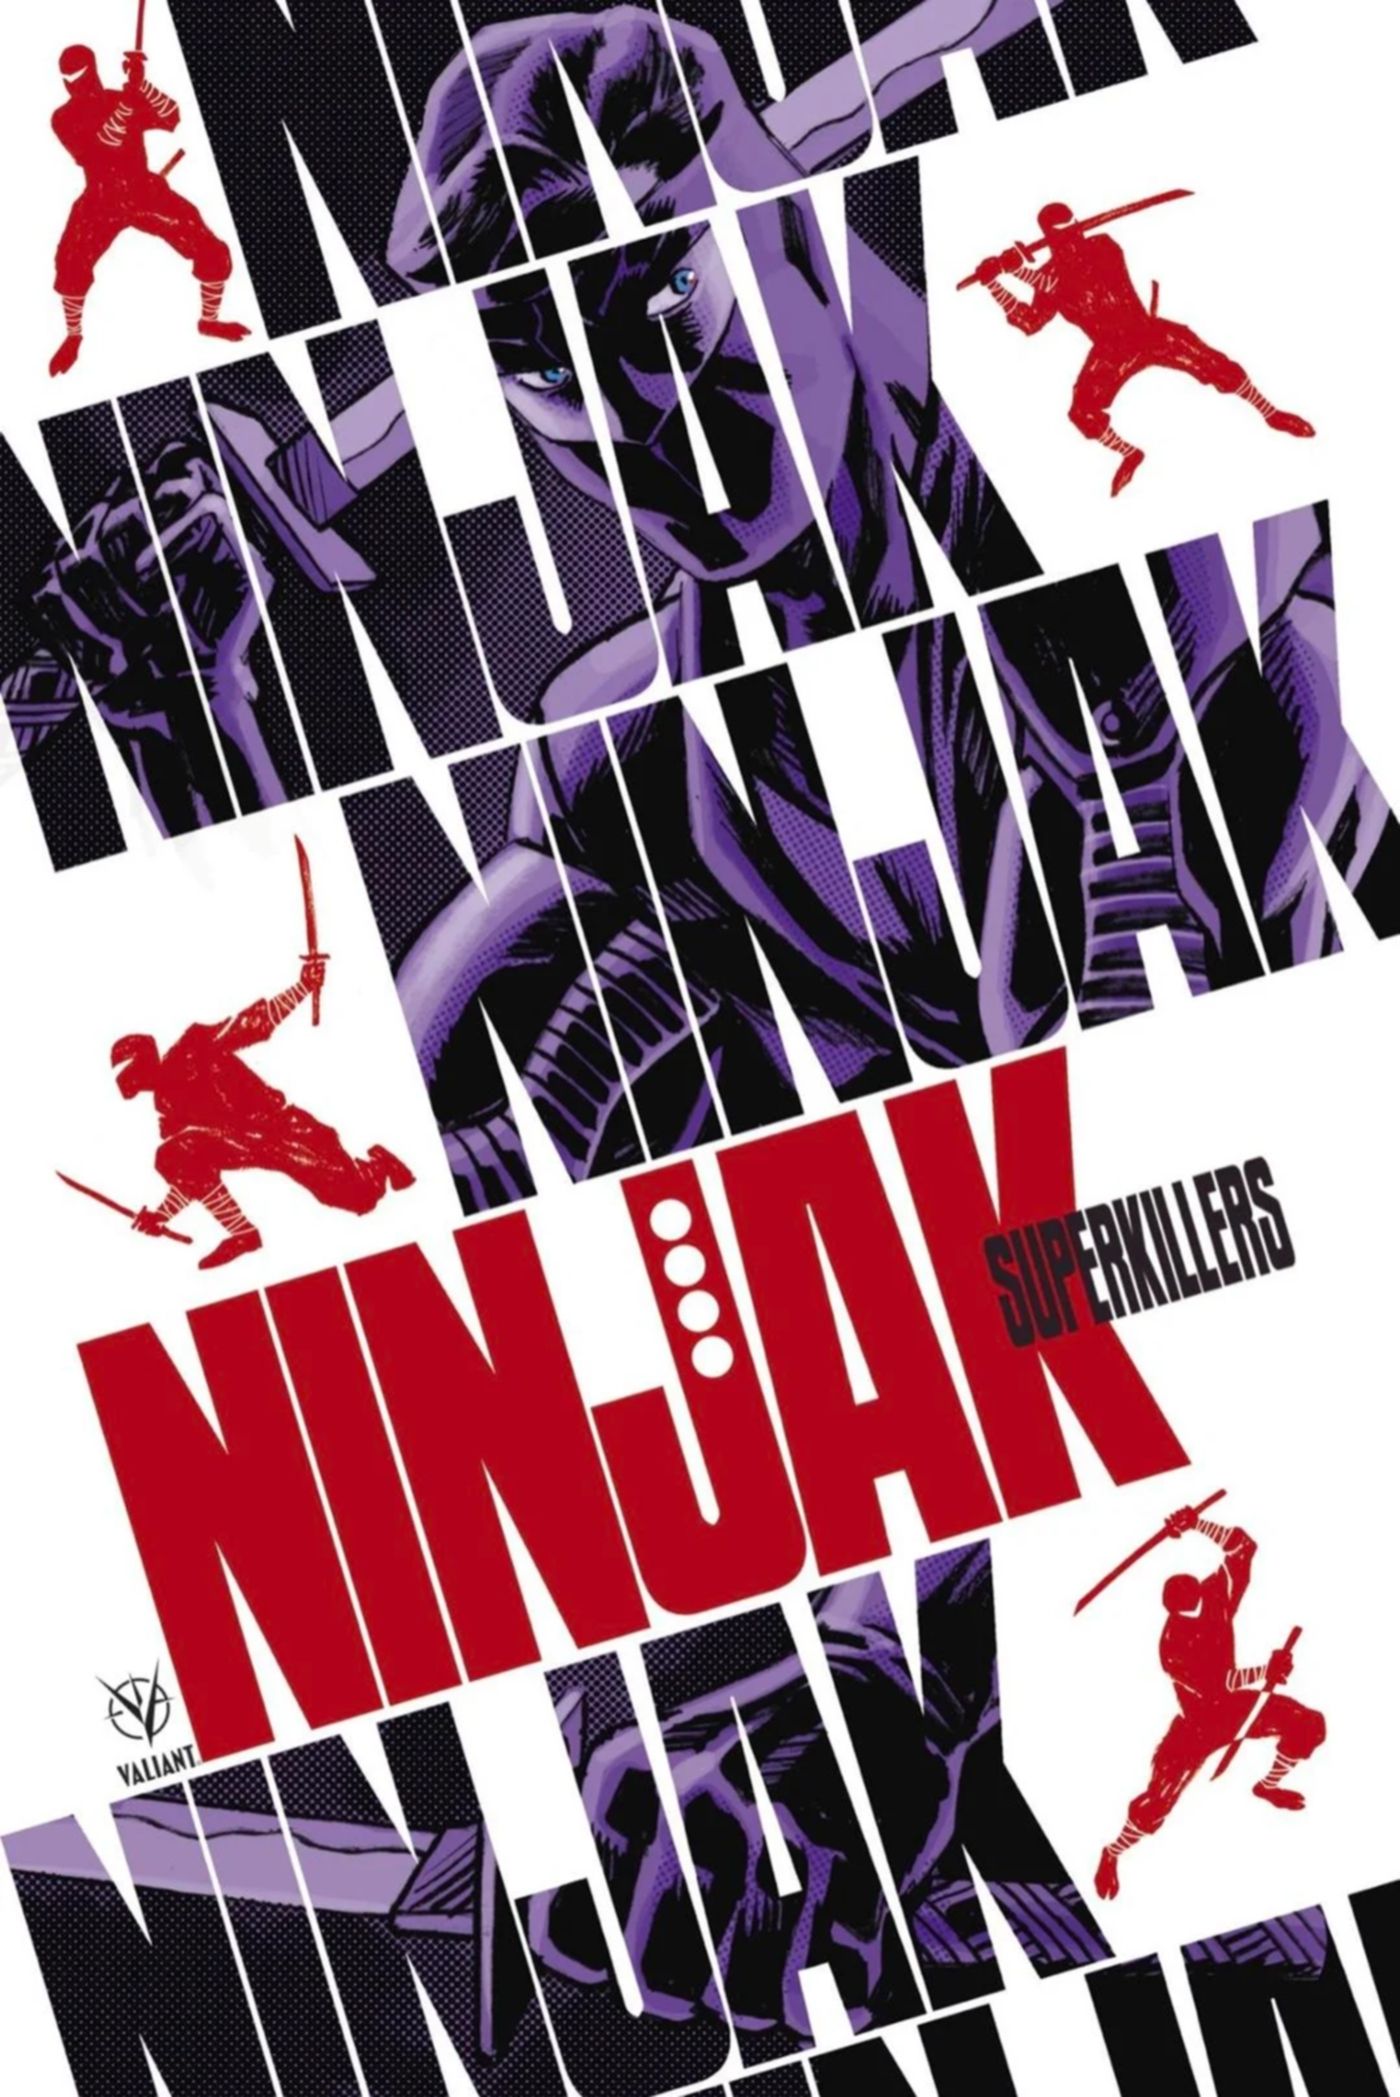 Ninjak Returns to Set-Up New Series in Free Comic-Book Day Special